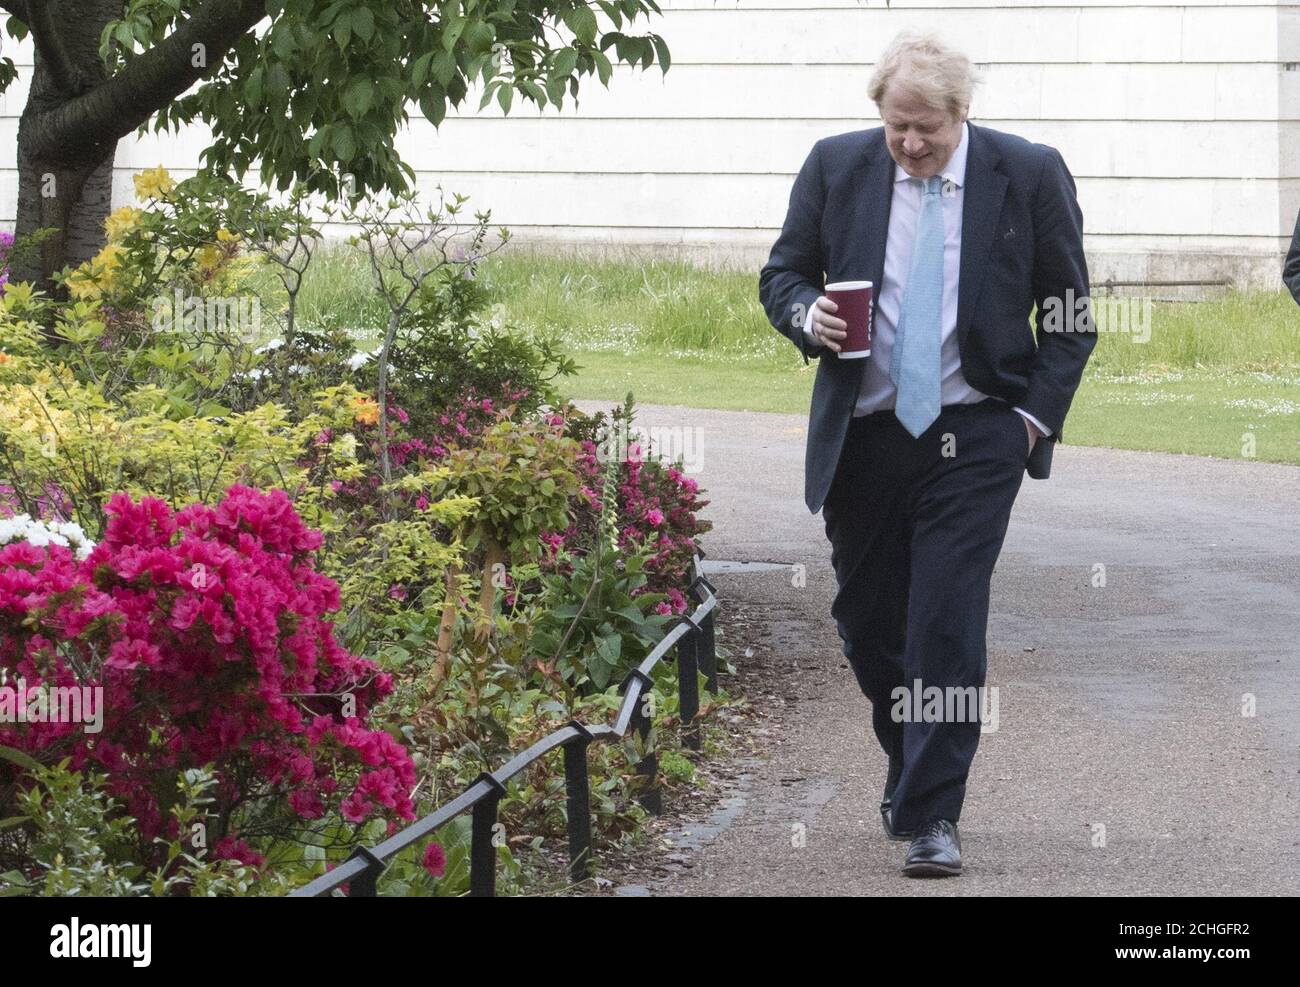 Prime Minister Boris Johnson takes a morning walk in St James' Park in London before returning to Downing Street, as the UK enters a seventh week of lockdown to help stop the spread of coronavirus. Stock Photo